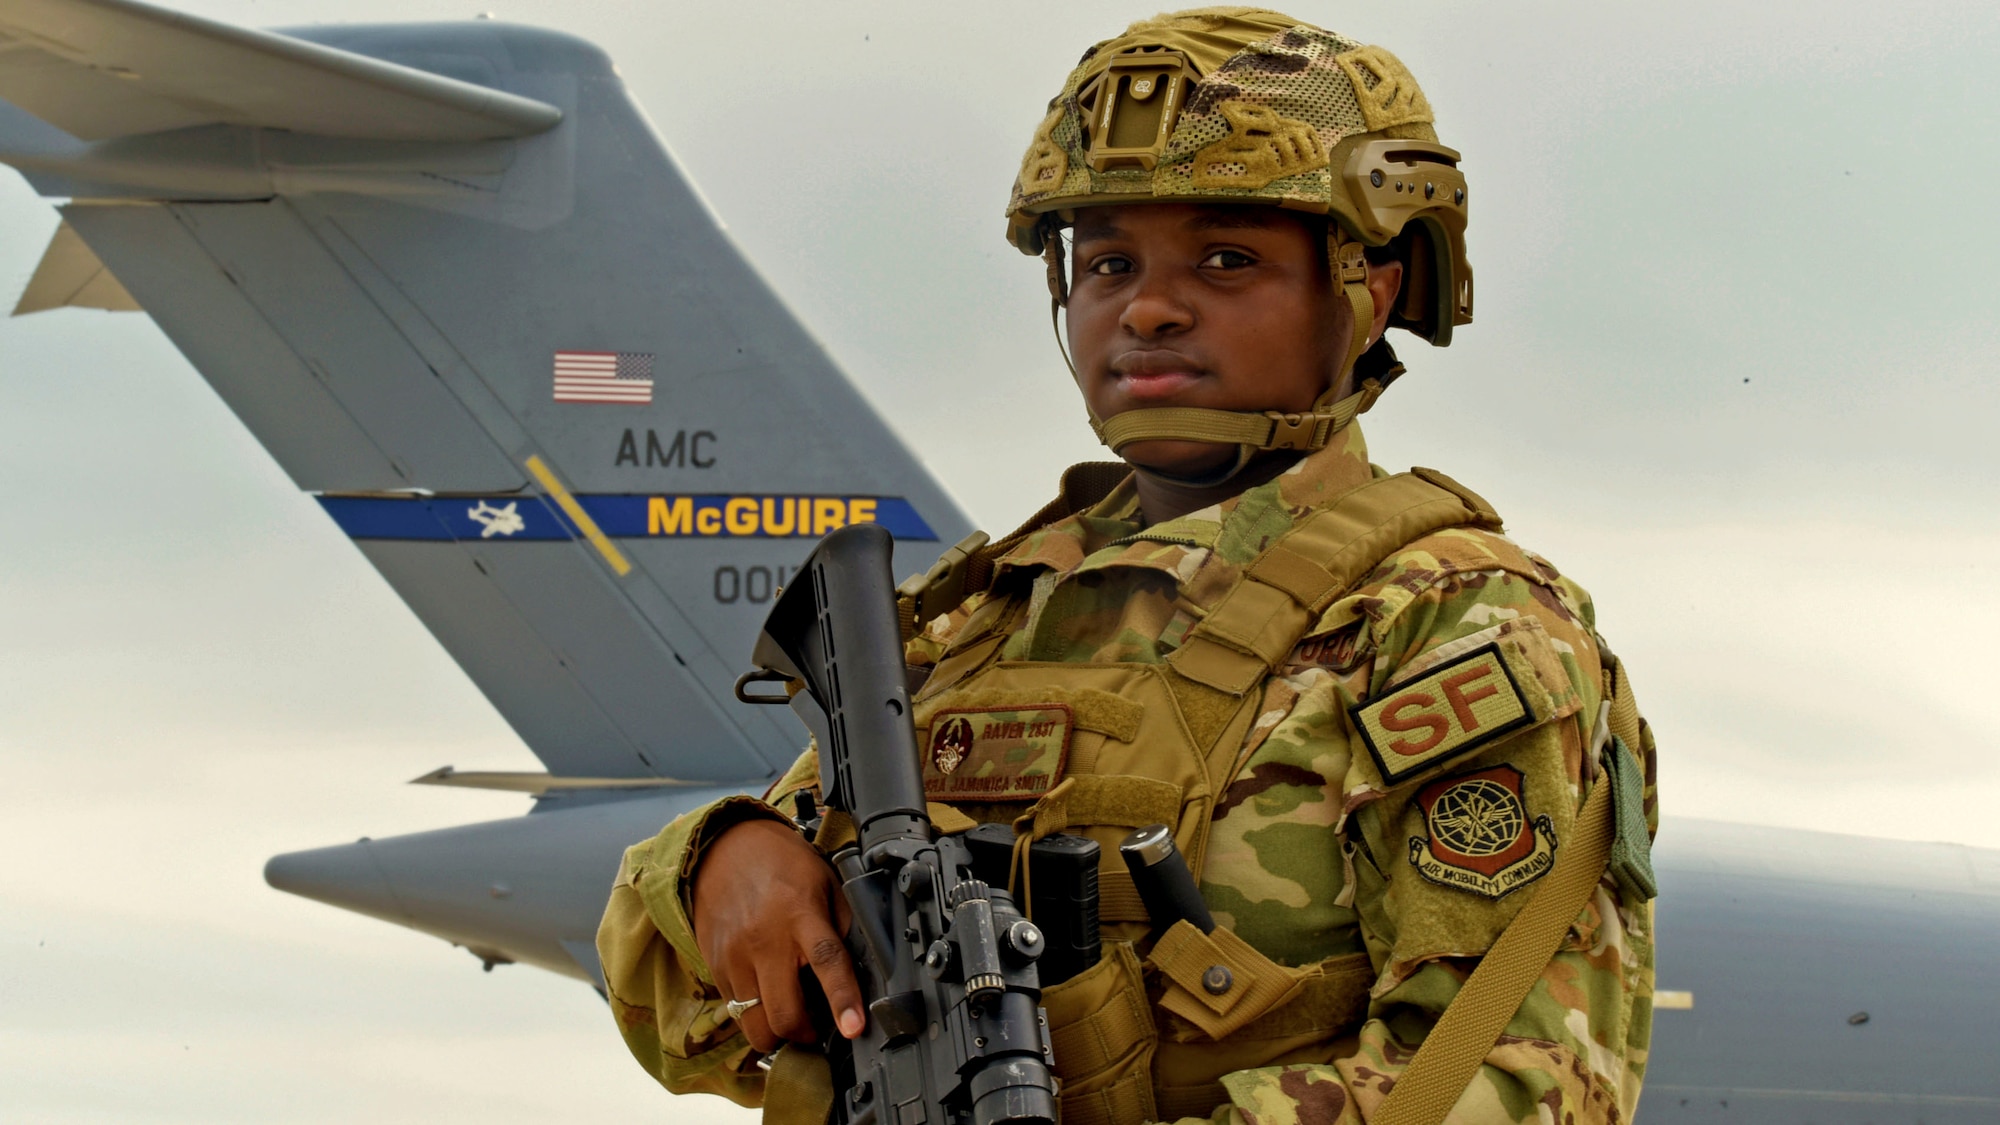 U.S. Air Force SrA Jamonica Smith, 87th Security Forces Squadron, Raven Instructor, poses next to a C-17 Globemaster III at Joint Base McGuire-Dix-Lakehurst on July 13, 2021.